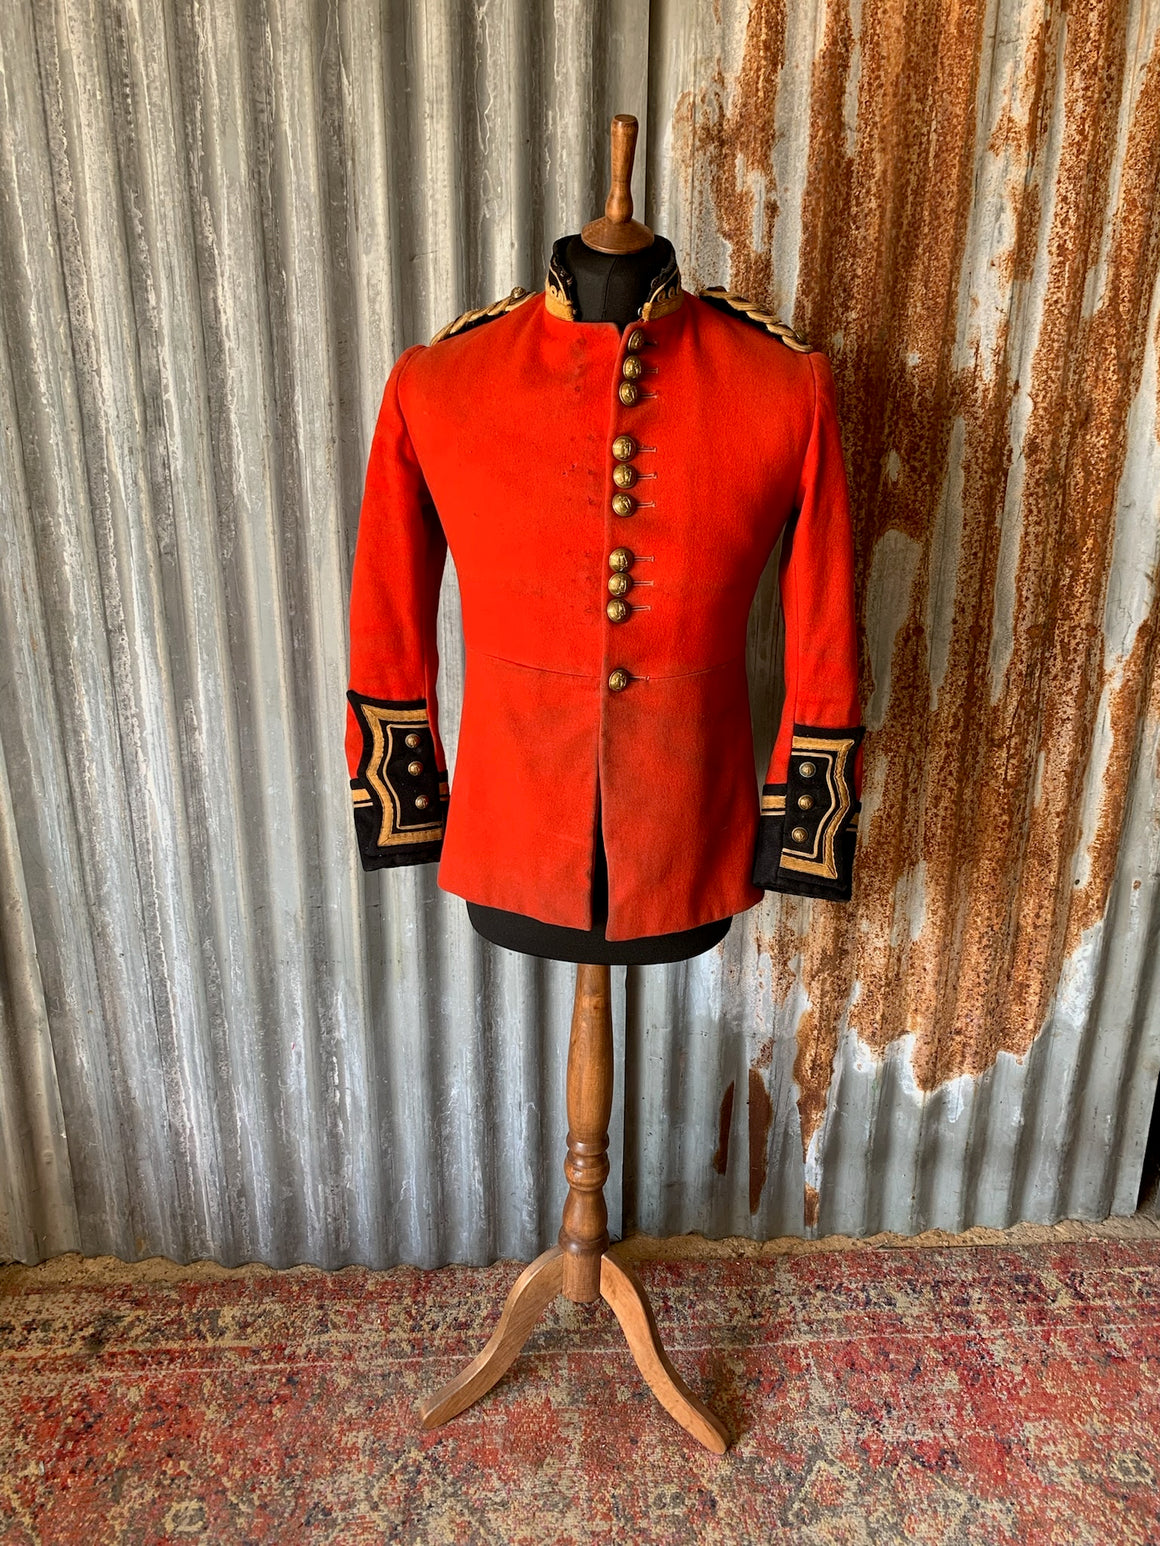 A military marching band jacket by Boosey & Hawkes